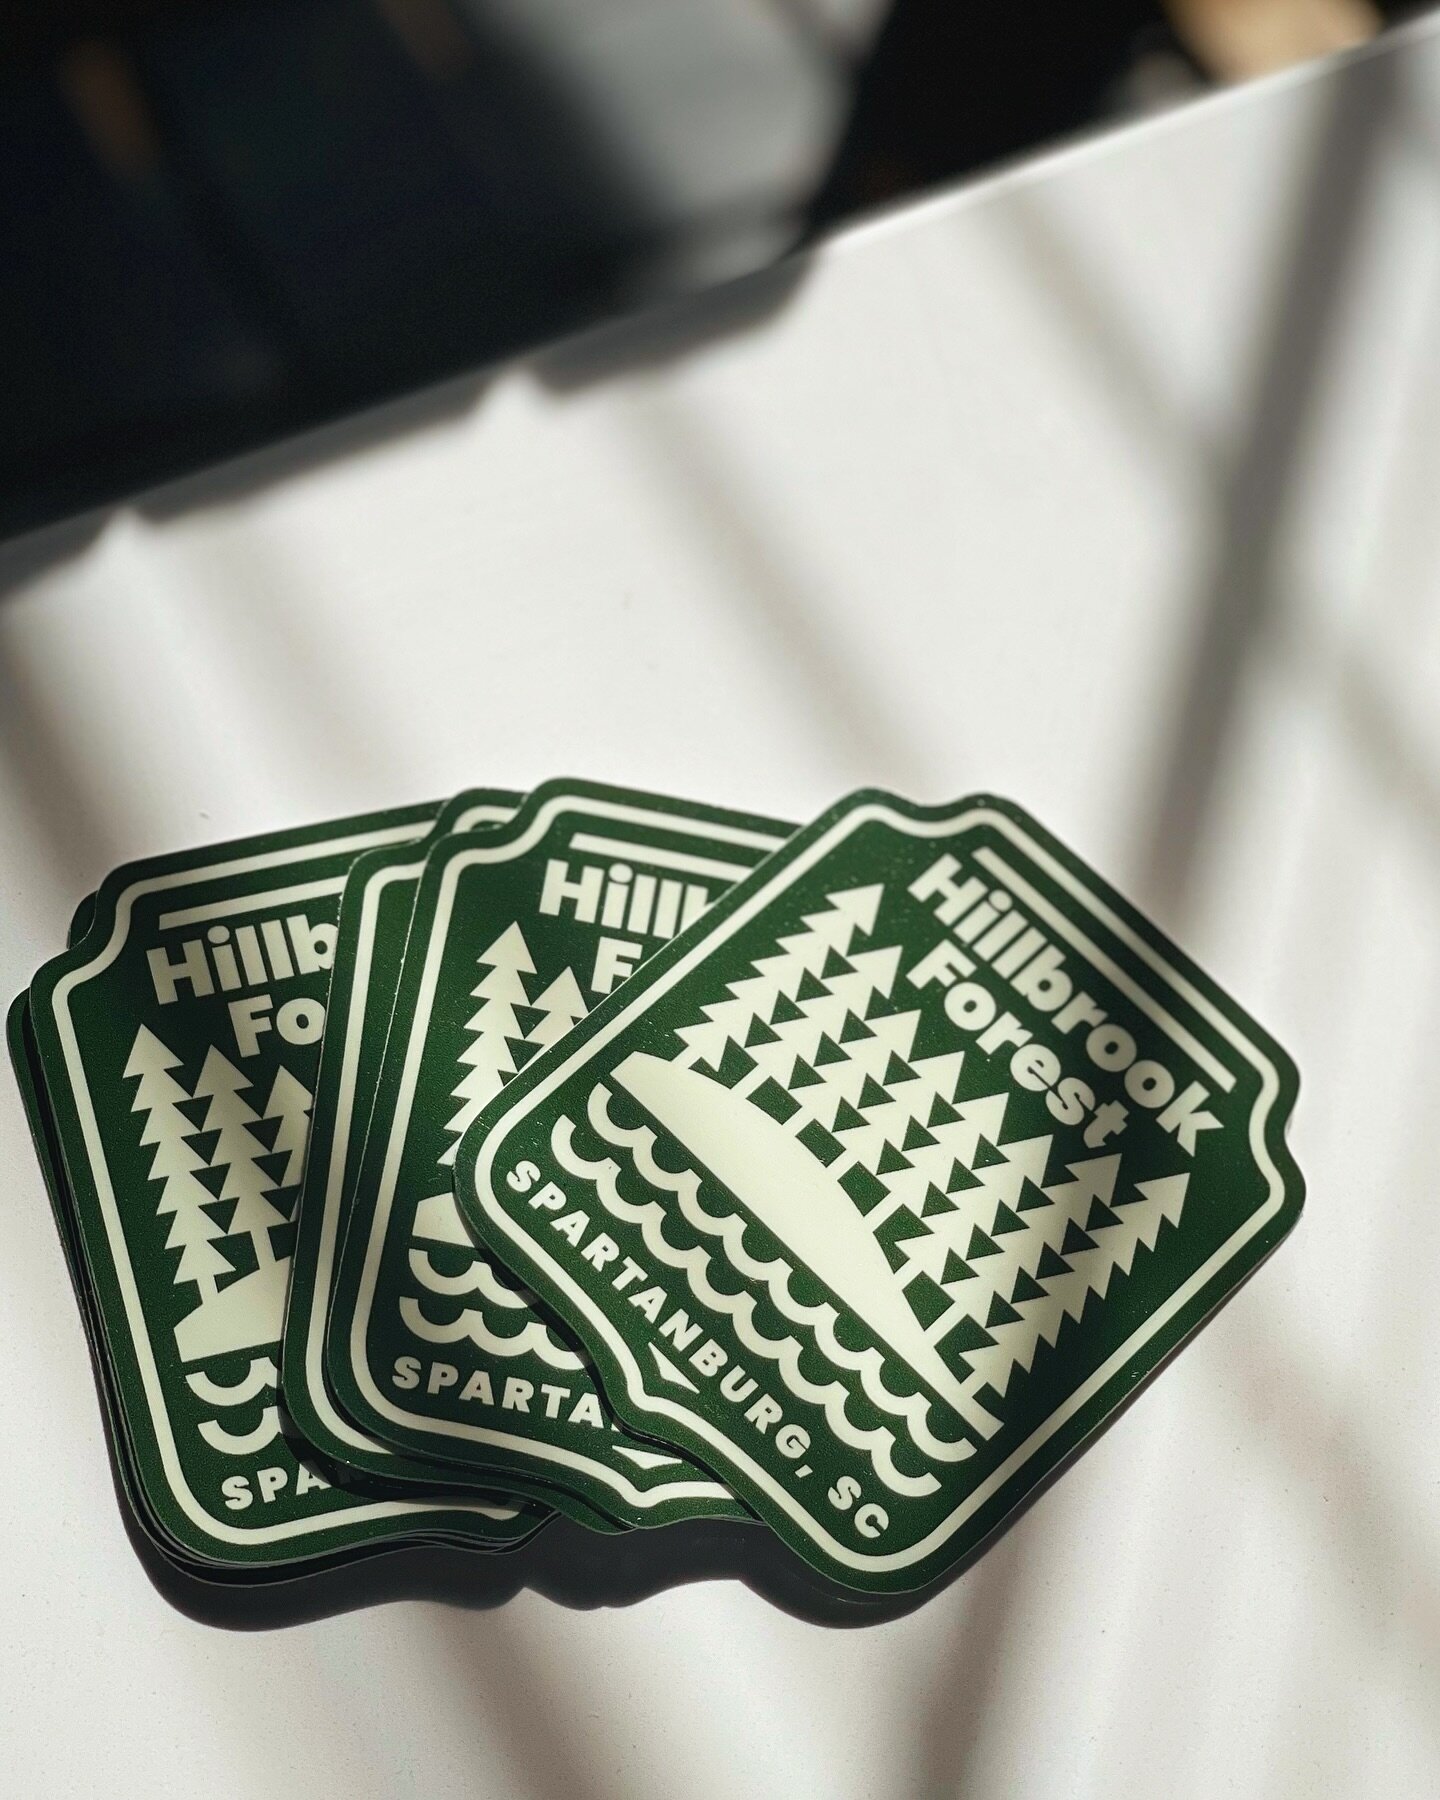 If you ordered a Hillbrook t-shirt you&rsquo;re also getting a sweet vinyl die-cut sticker!